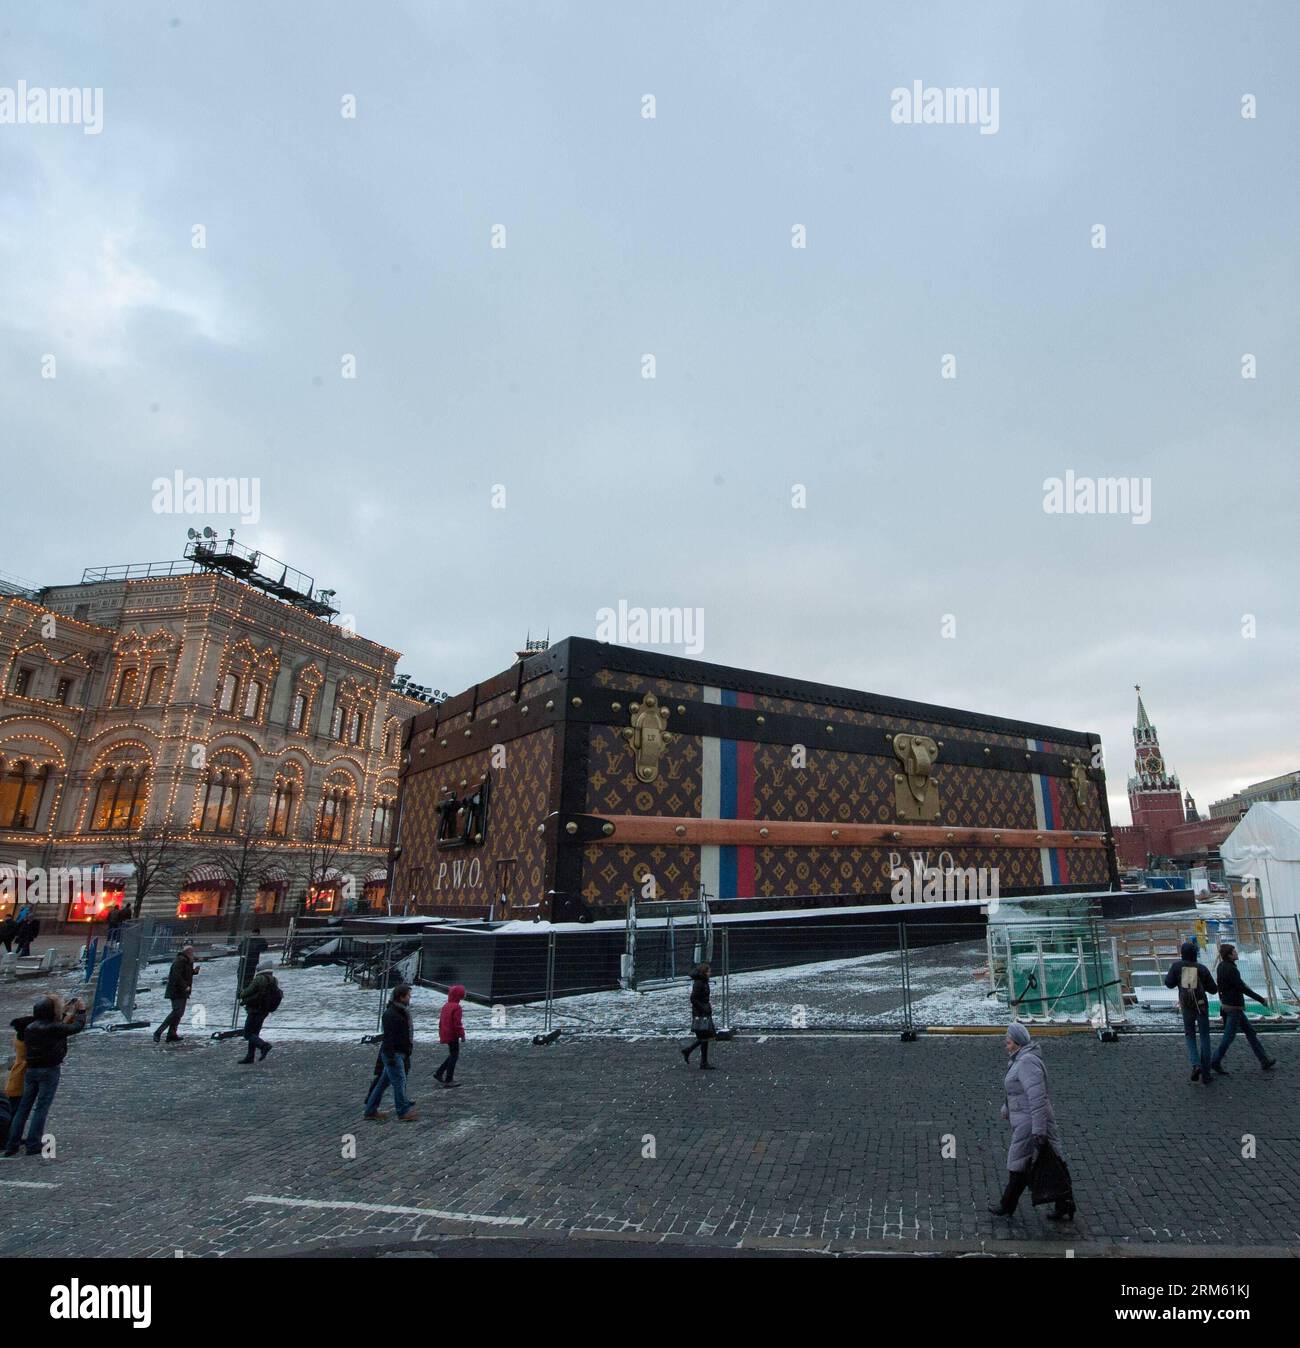 LV suitcase occupies Moscow's Red Square[2]